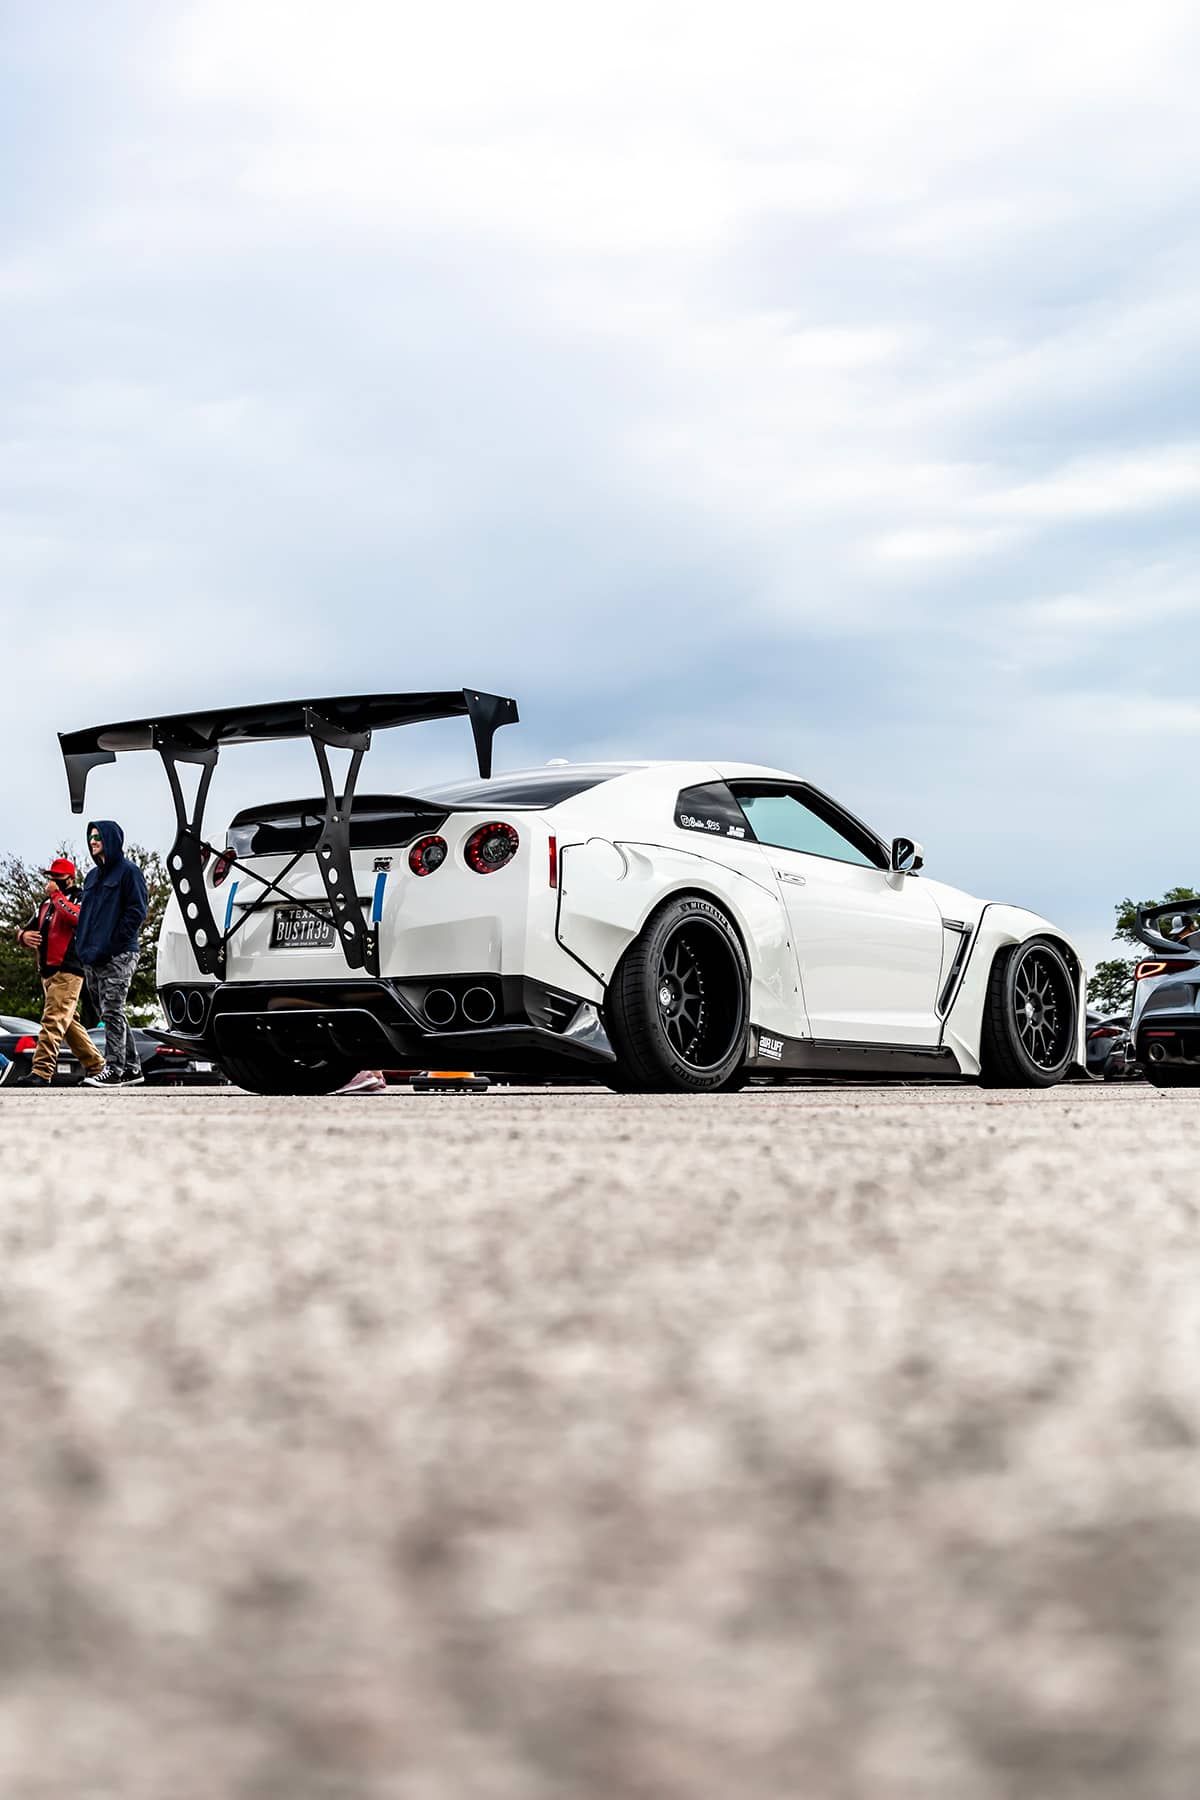 Nissan GT-R R35 modified for Time-attack competitions